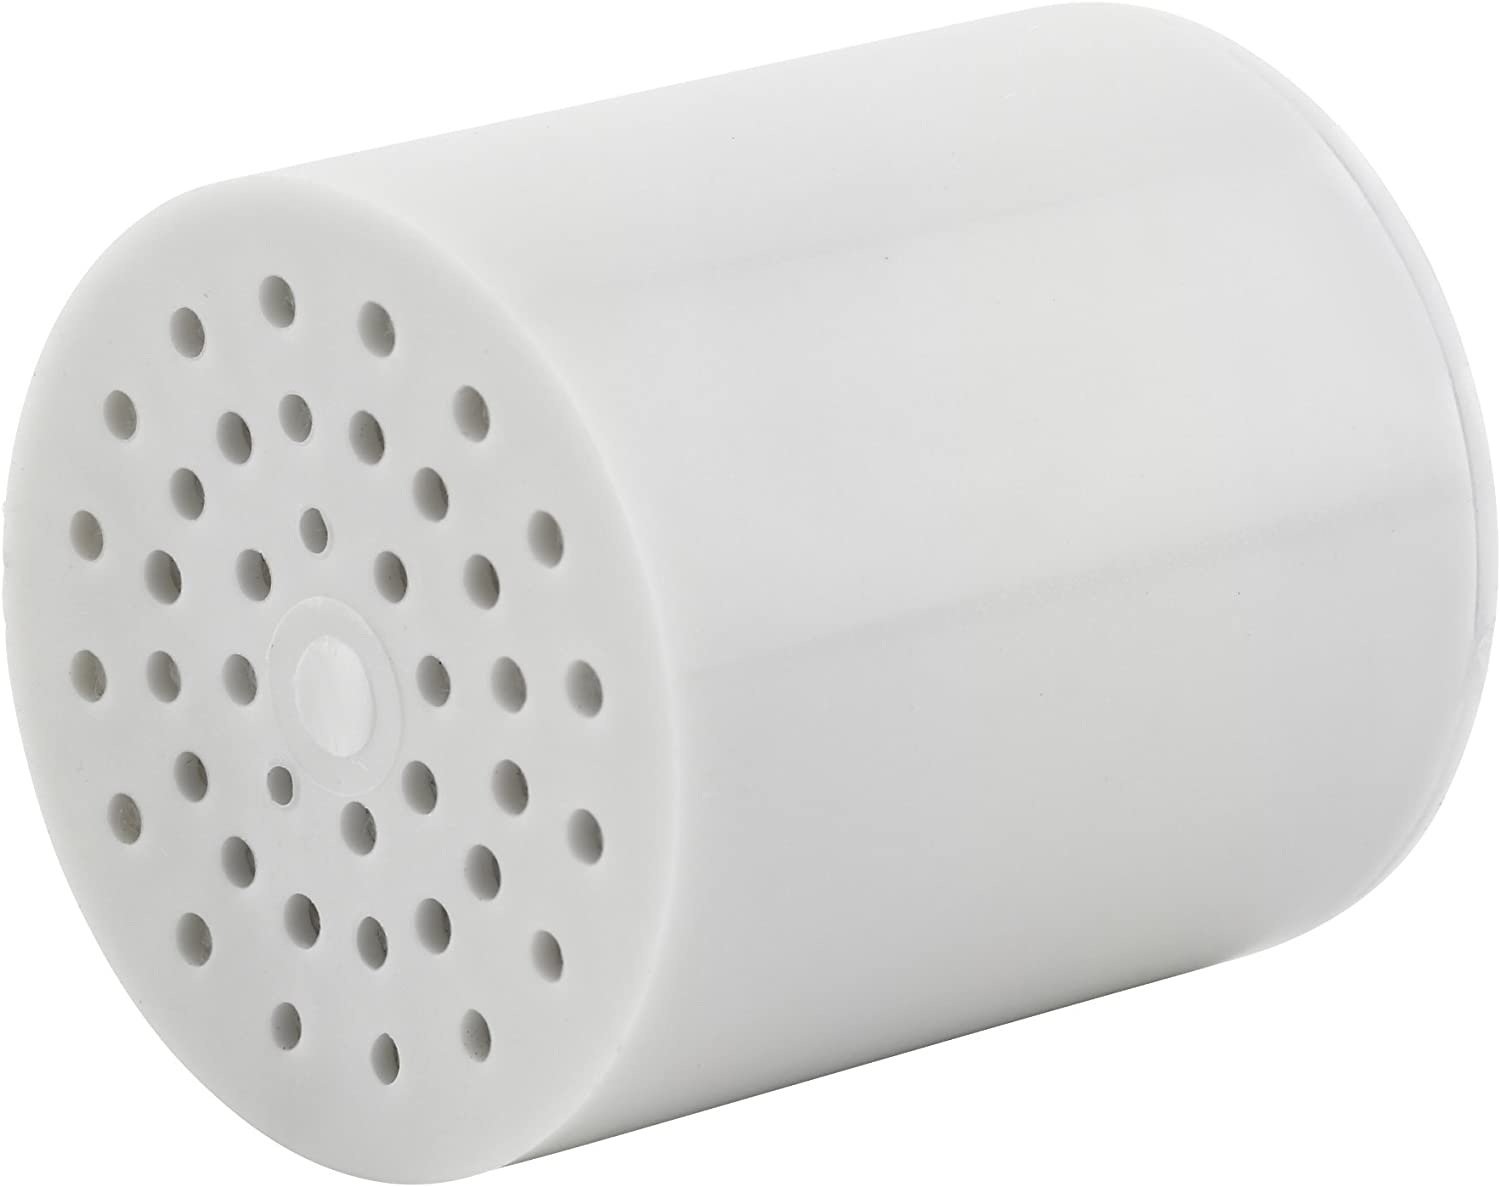 Showerhead Replacement Filter